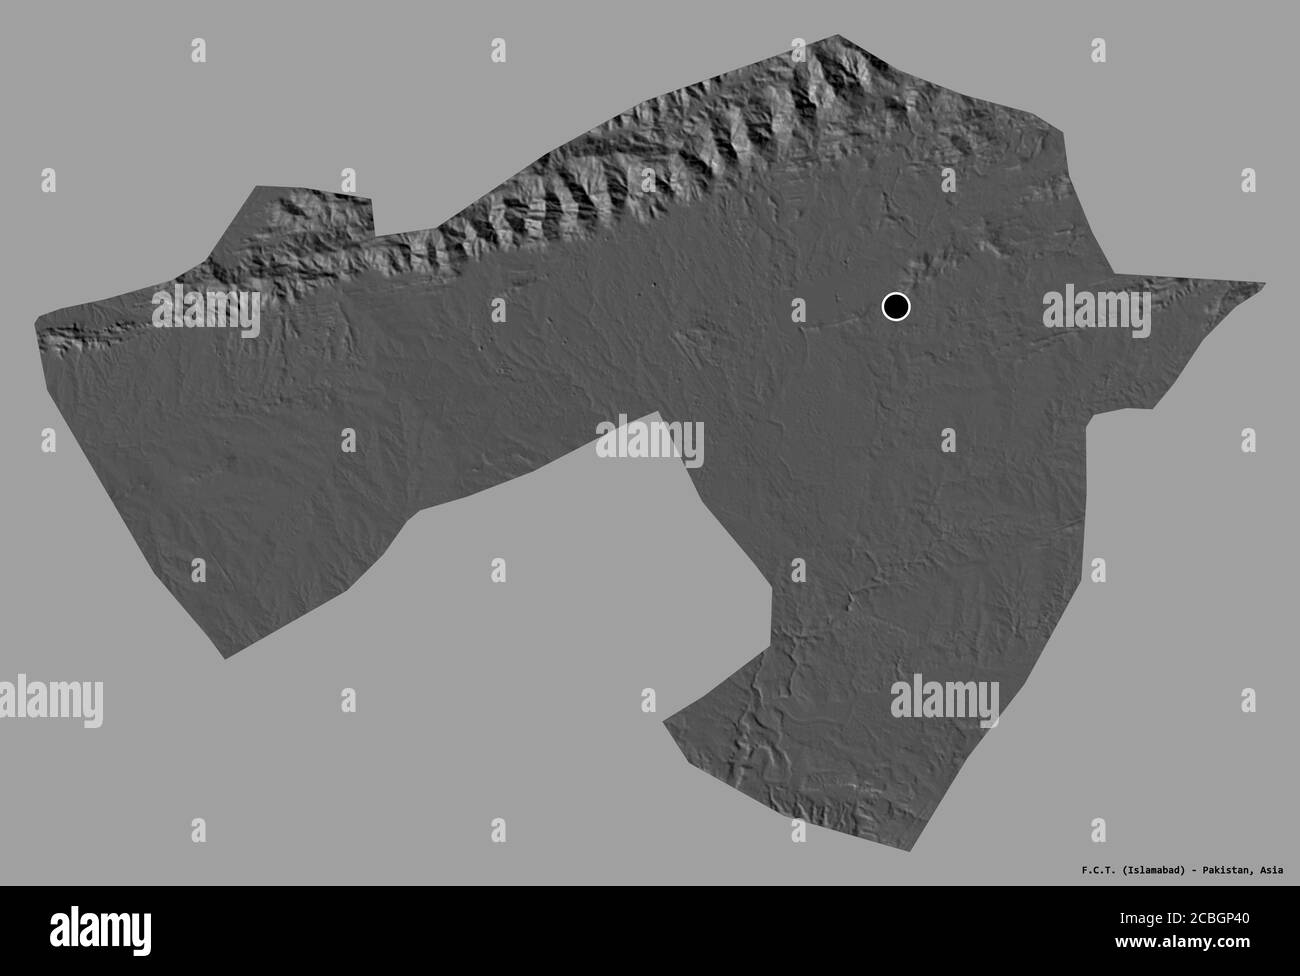 Shape of F.C.T., capital territory of Pakistan, with its capital isolated on a solid color background. Bilevel elevation map. 3D rendering Stock Photo